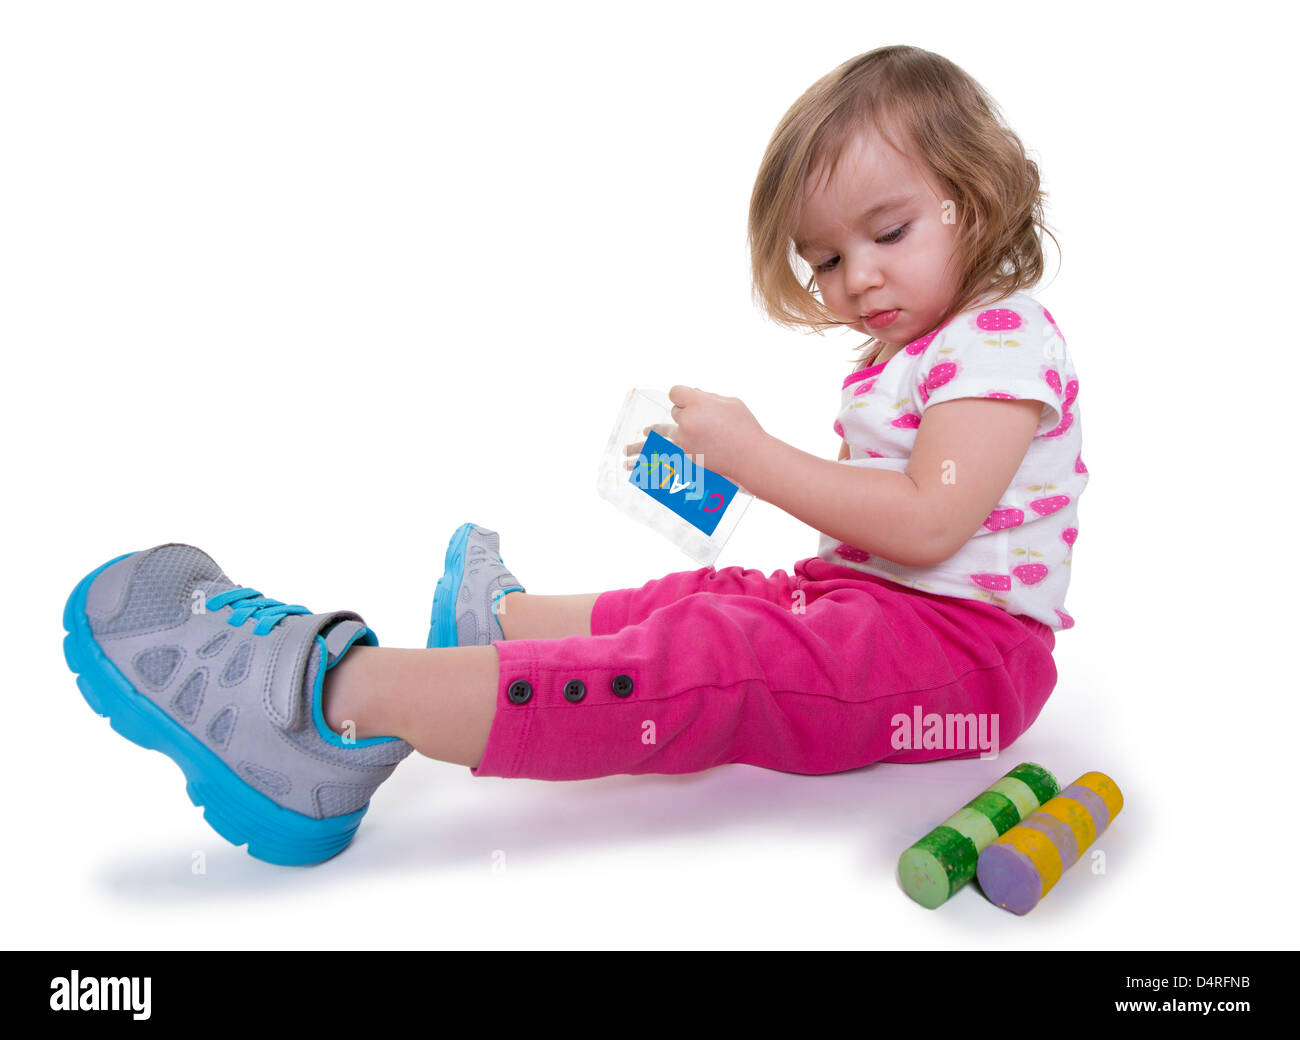 Toddler girl with colorful chalks in her hands getting ready for activity time, isolated on white. Stock Photo